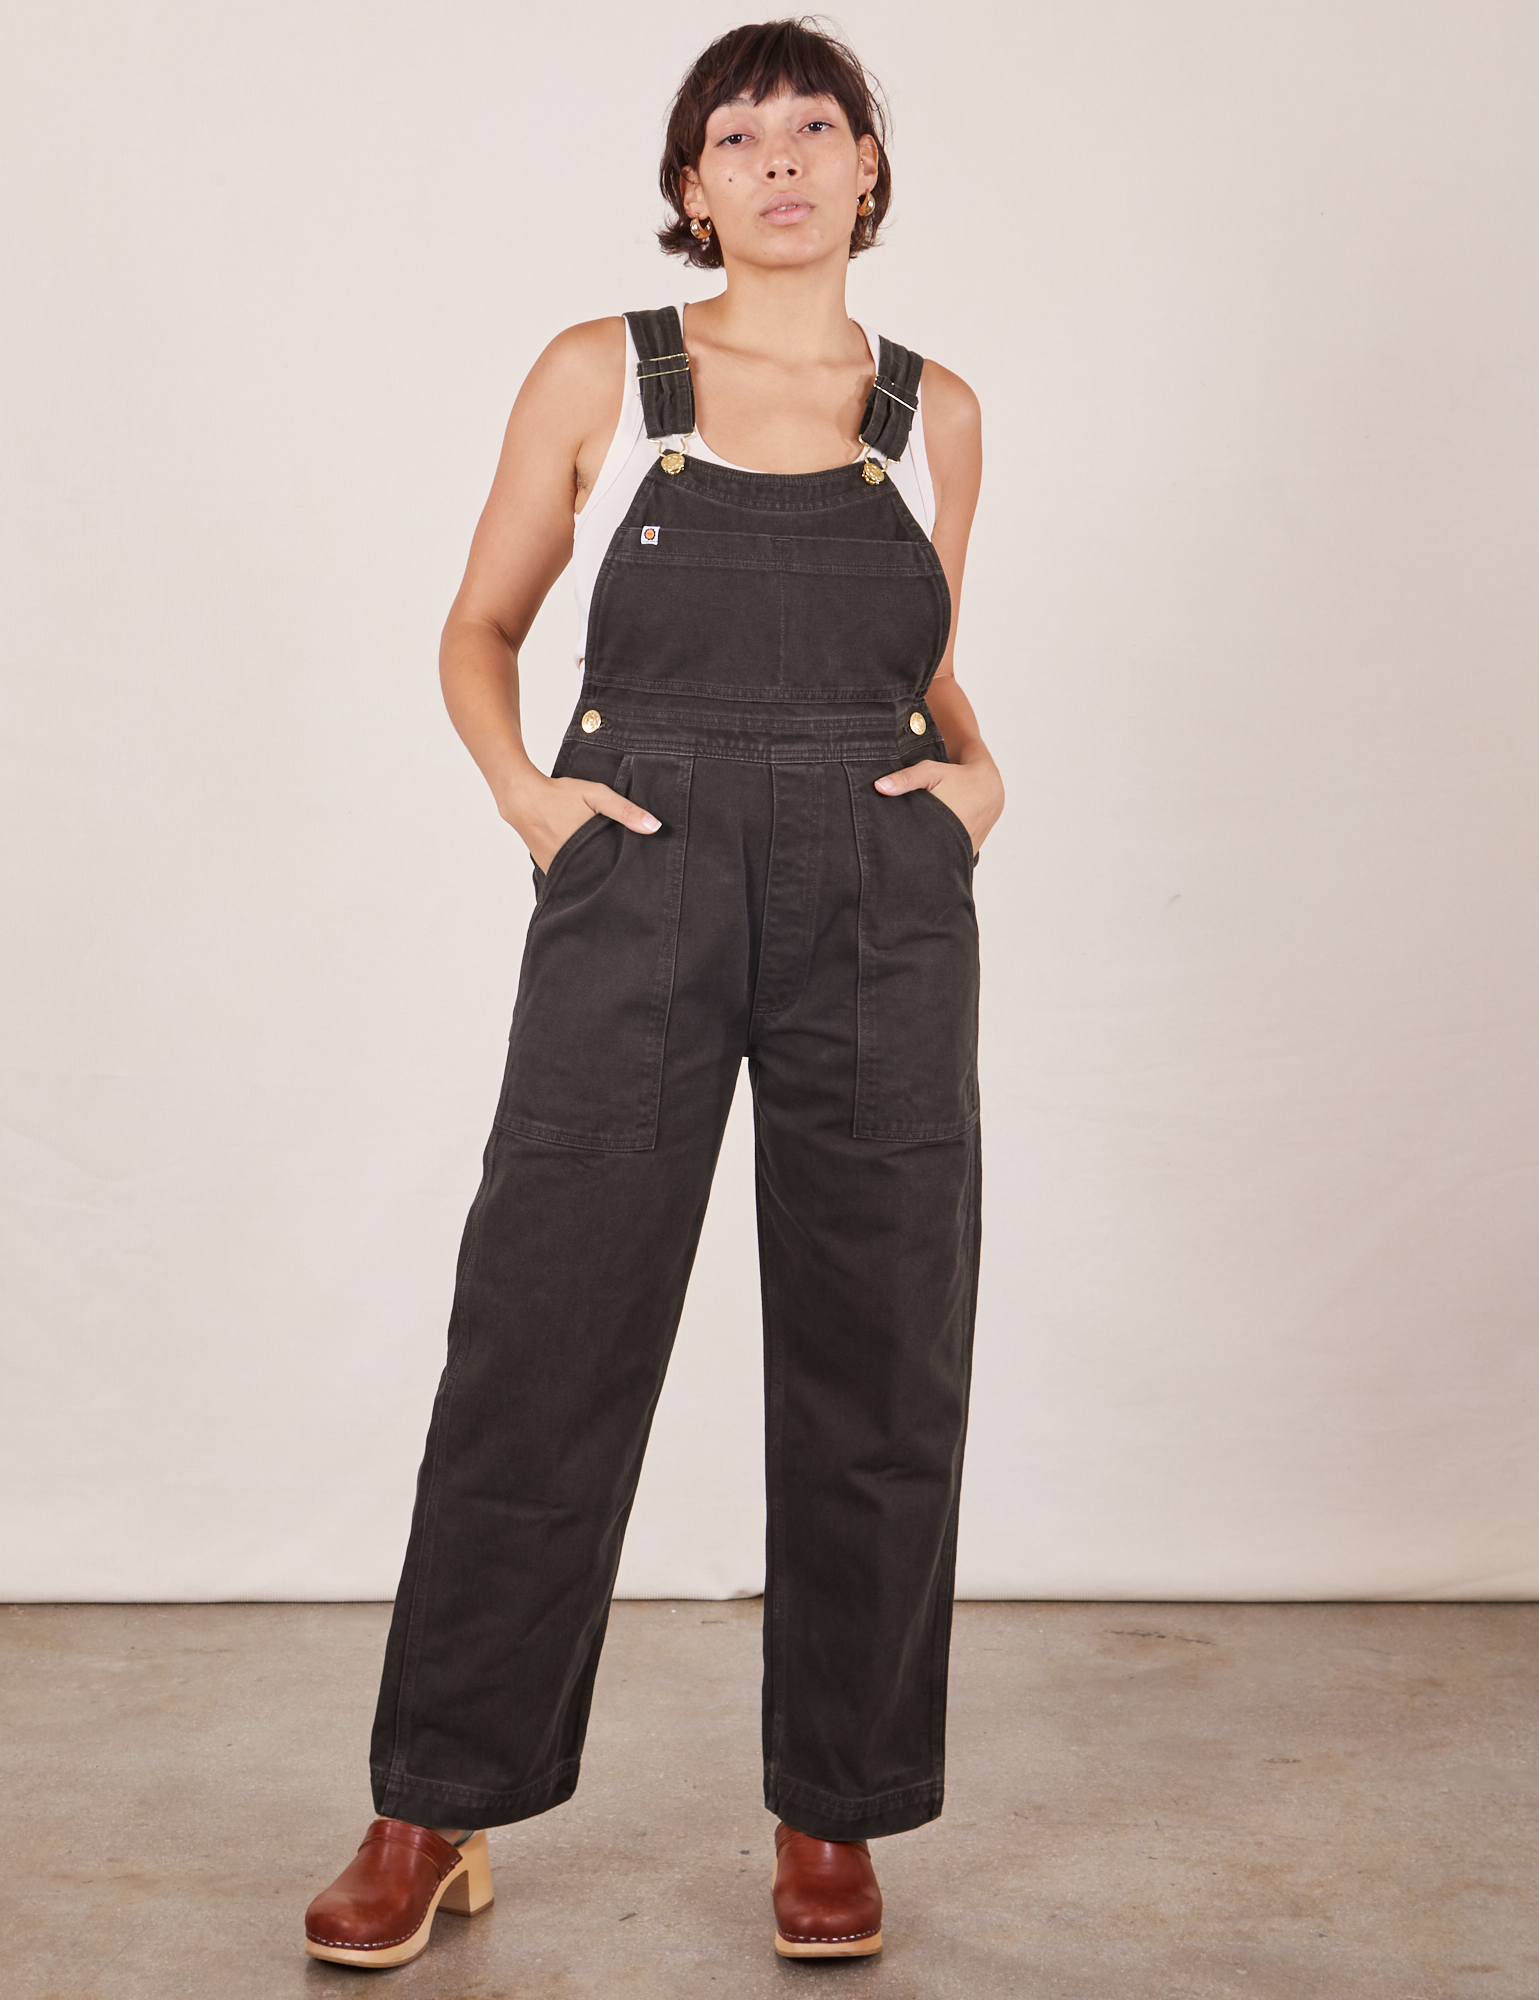 Tiara is wearing Original Overalls in Mono Espresso and Cropped Tank Top in vintage tee off-white